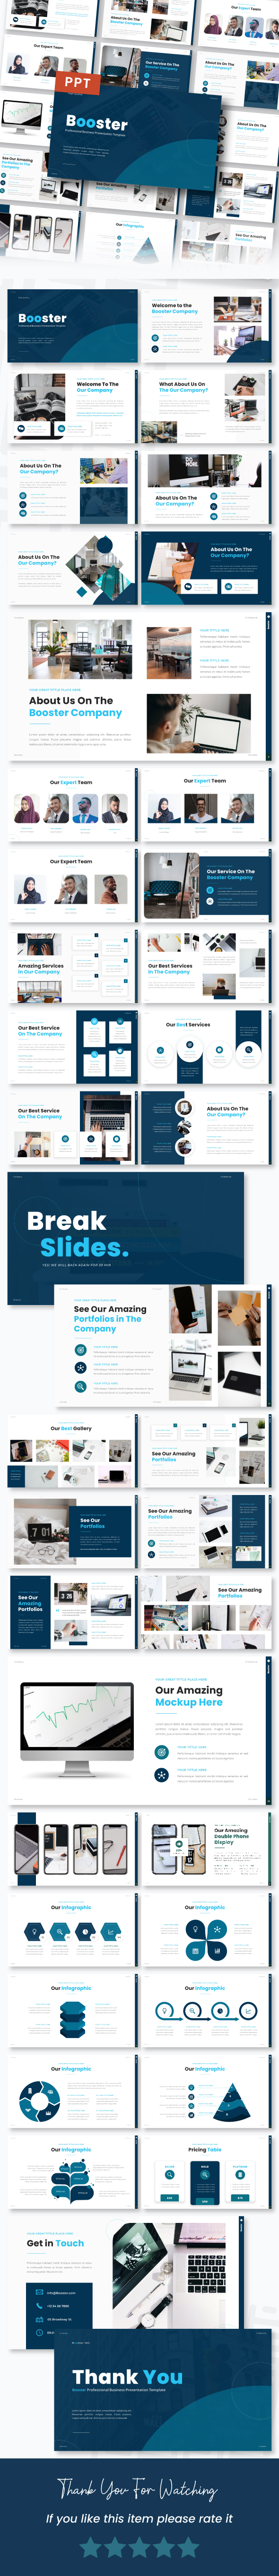 [DOWNLOAD]Booster - Business PowerPoint Template